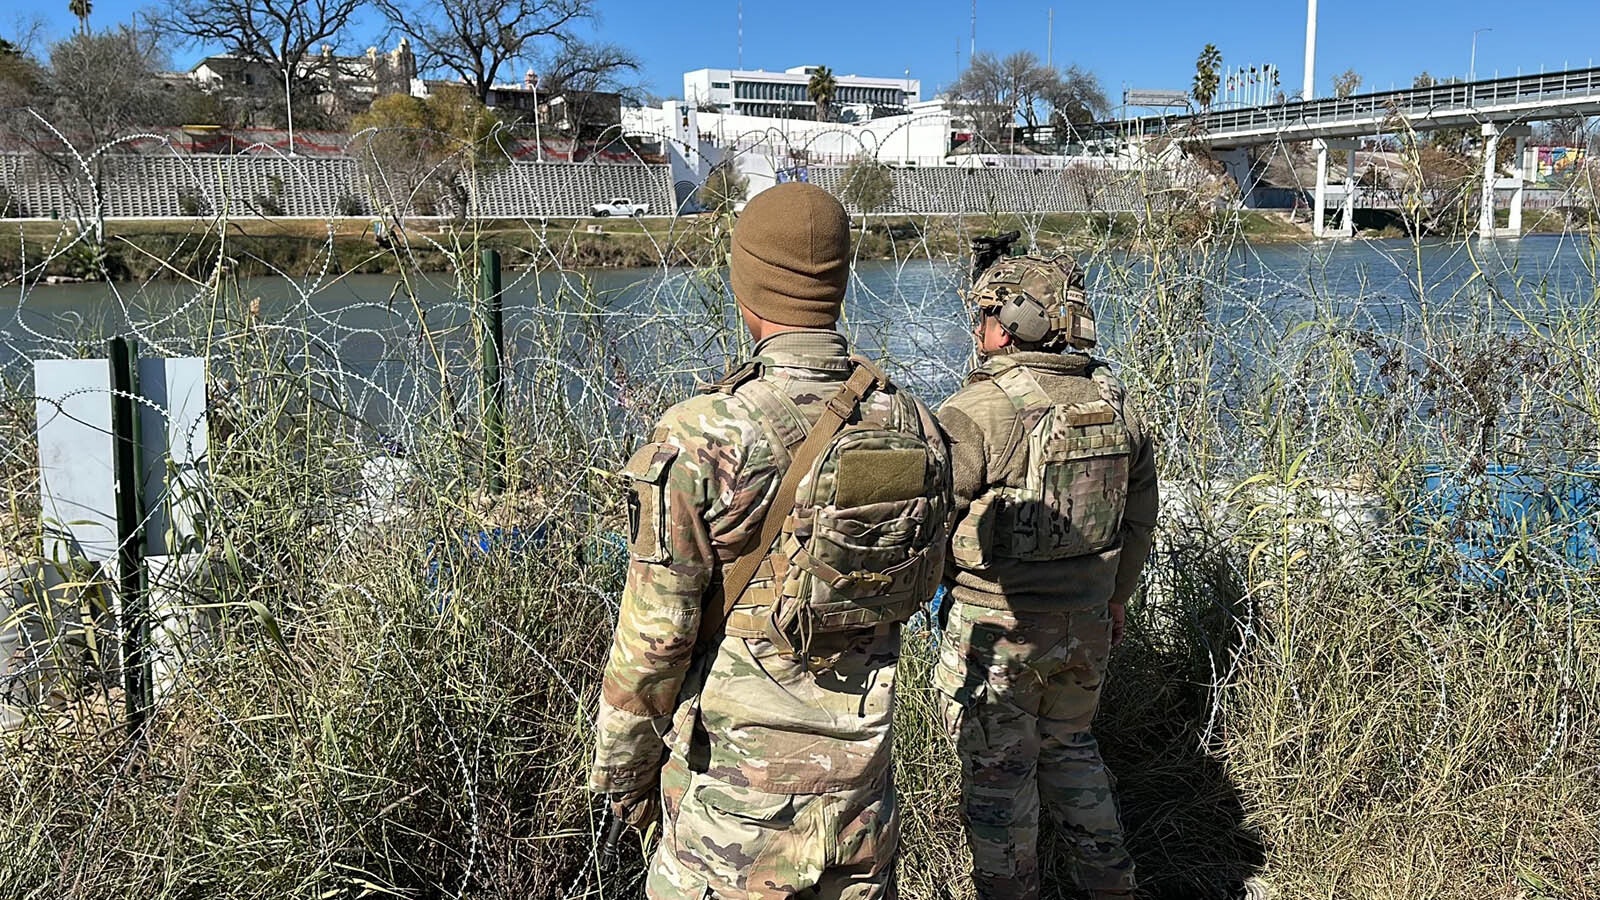 Members of the Texas National Guard watch over a section of the U.S. border with Mexico.